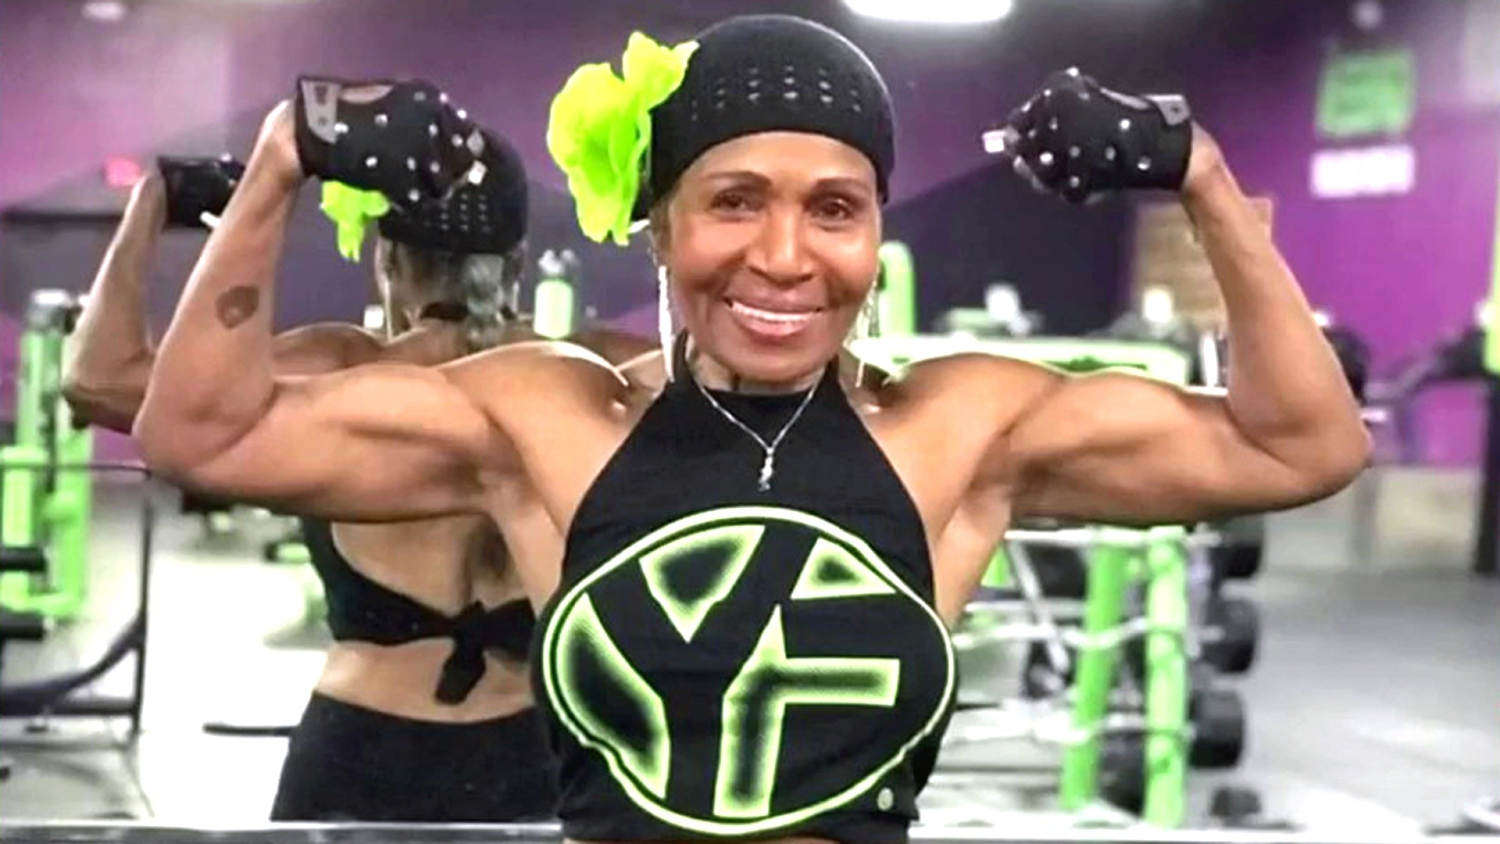 Enough excuses: 85-year-old bodybuilder is motivating others to